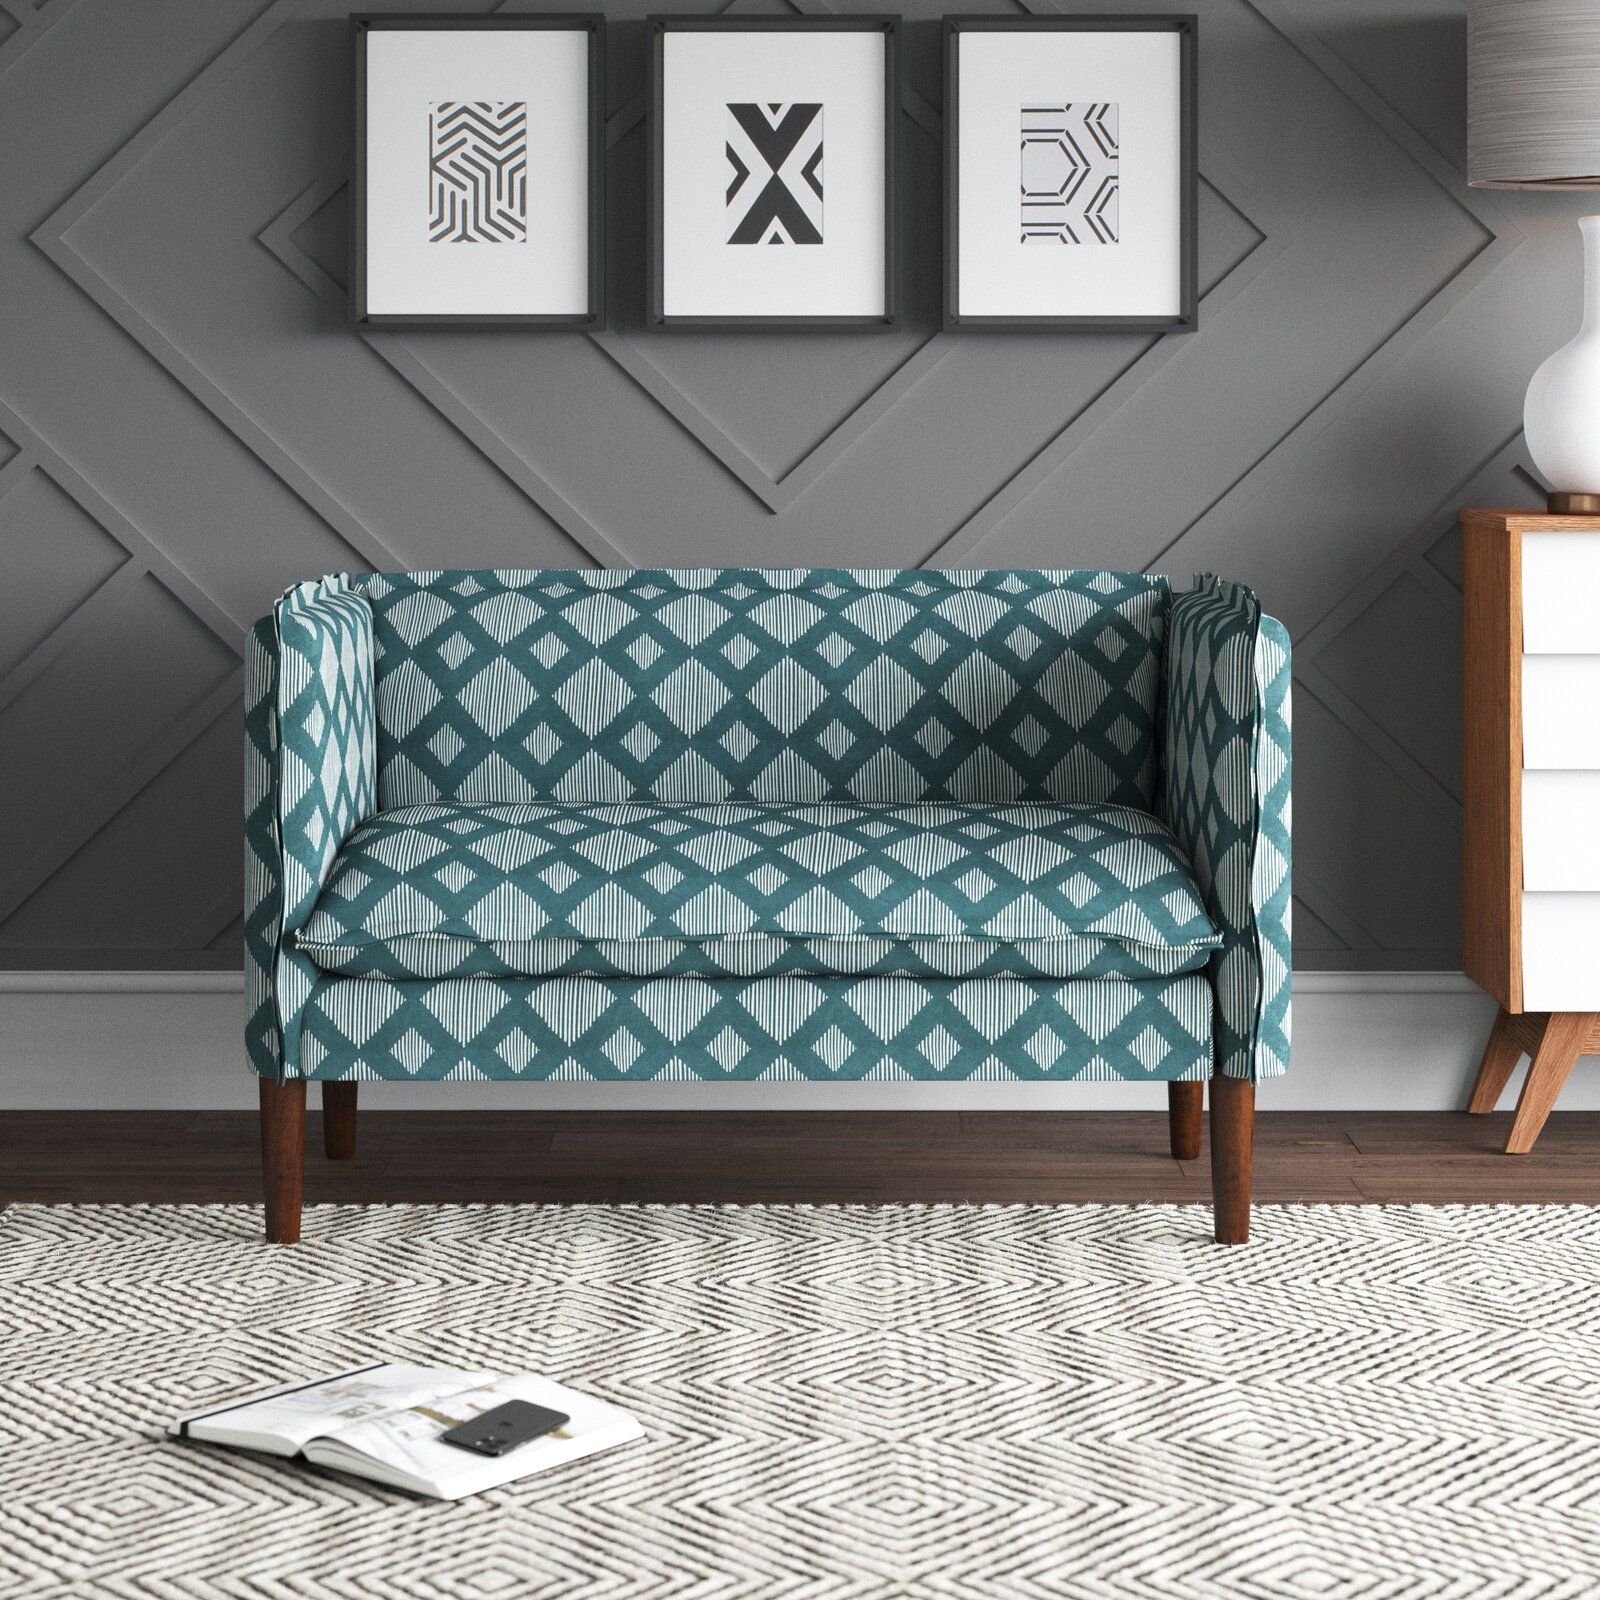 25 Best Sofa Trends In 2021 To Watch Out For – Décor Aid For Sofas In Pattern (View 10 of 20)